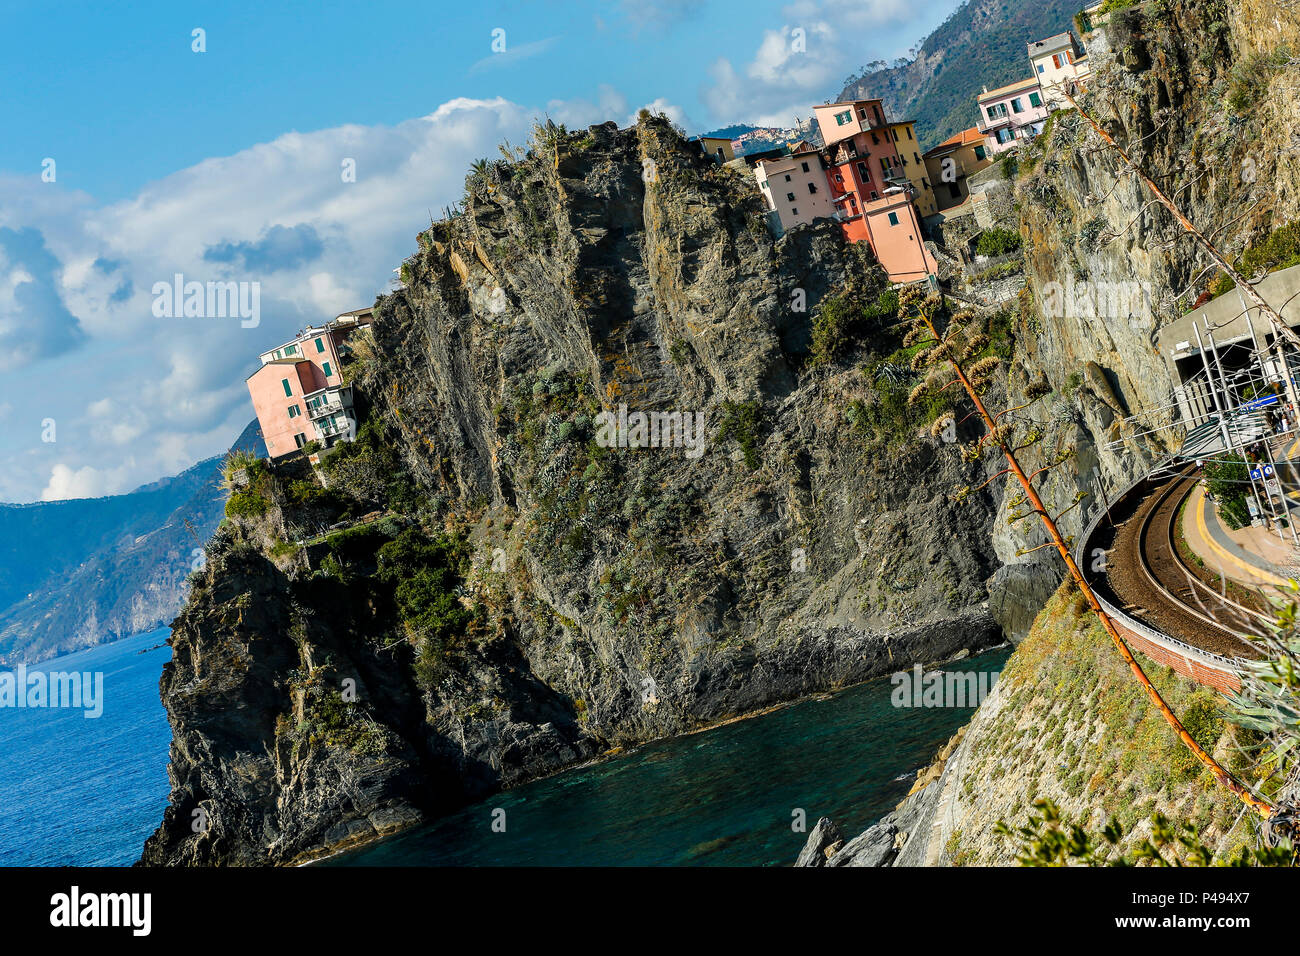 Tilted image of cliffs, sea and colorful cliff-sde homes seen from the train station, Manarola, Cinque Terre Stock Photo